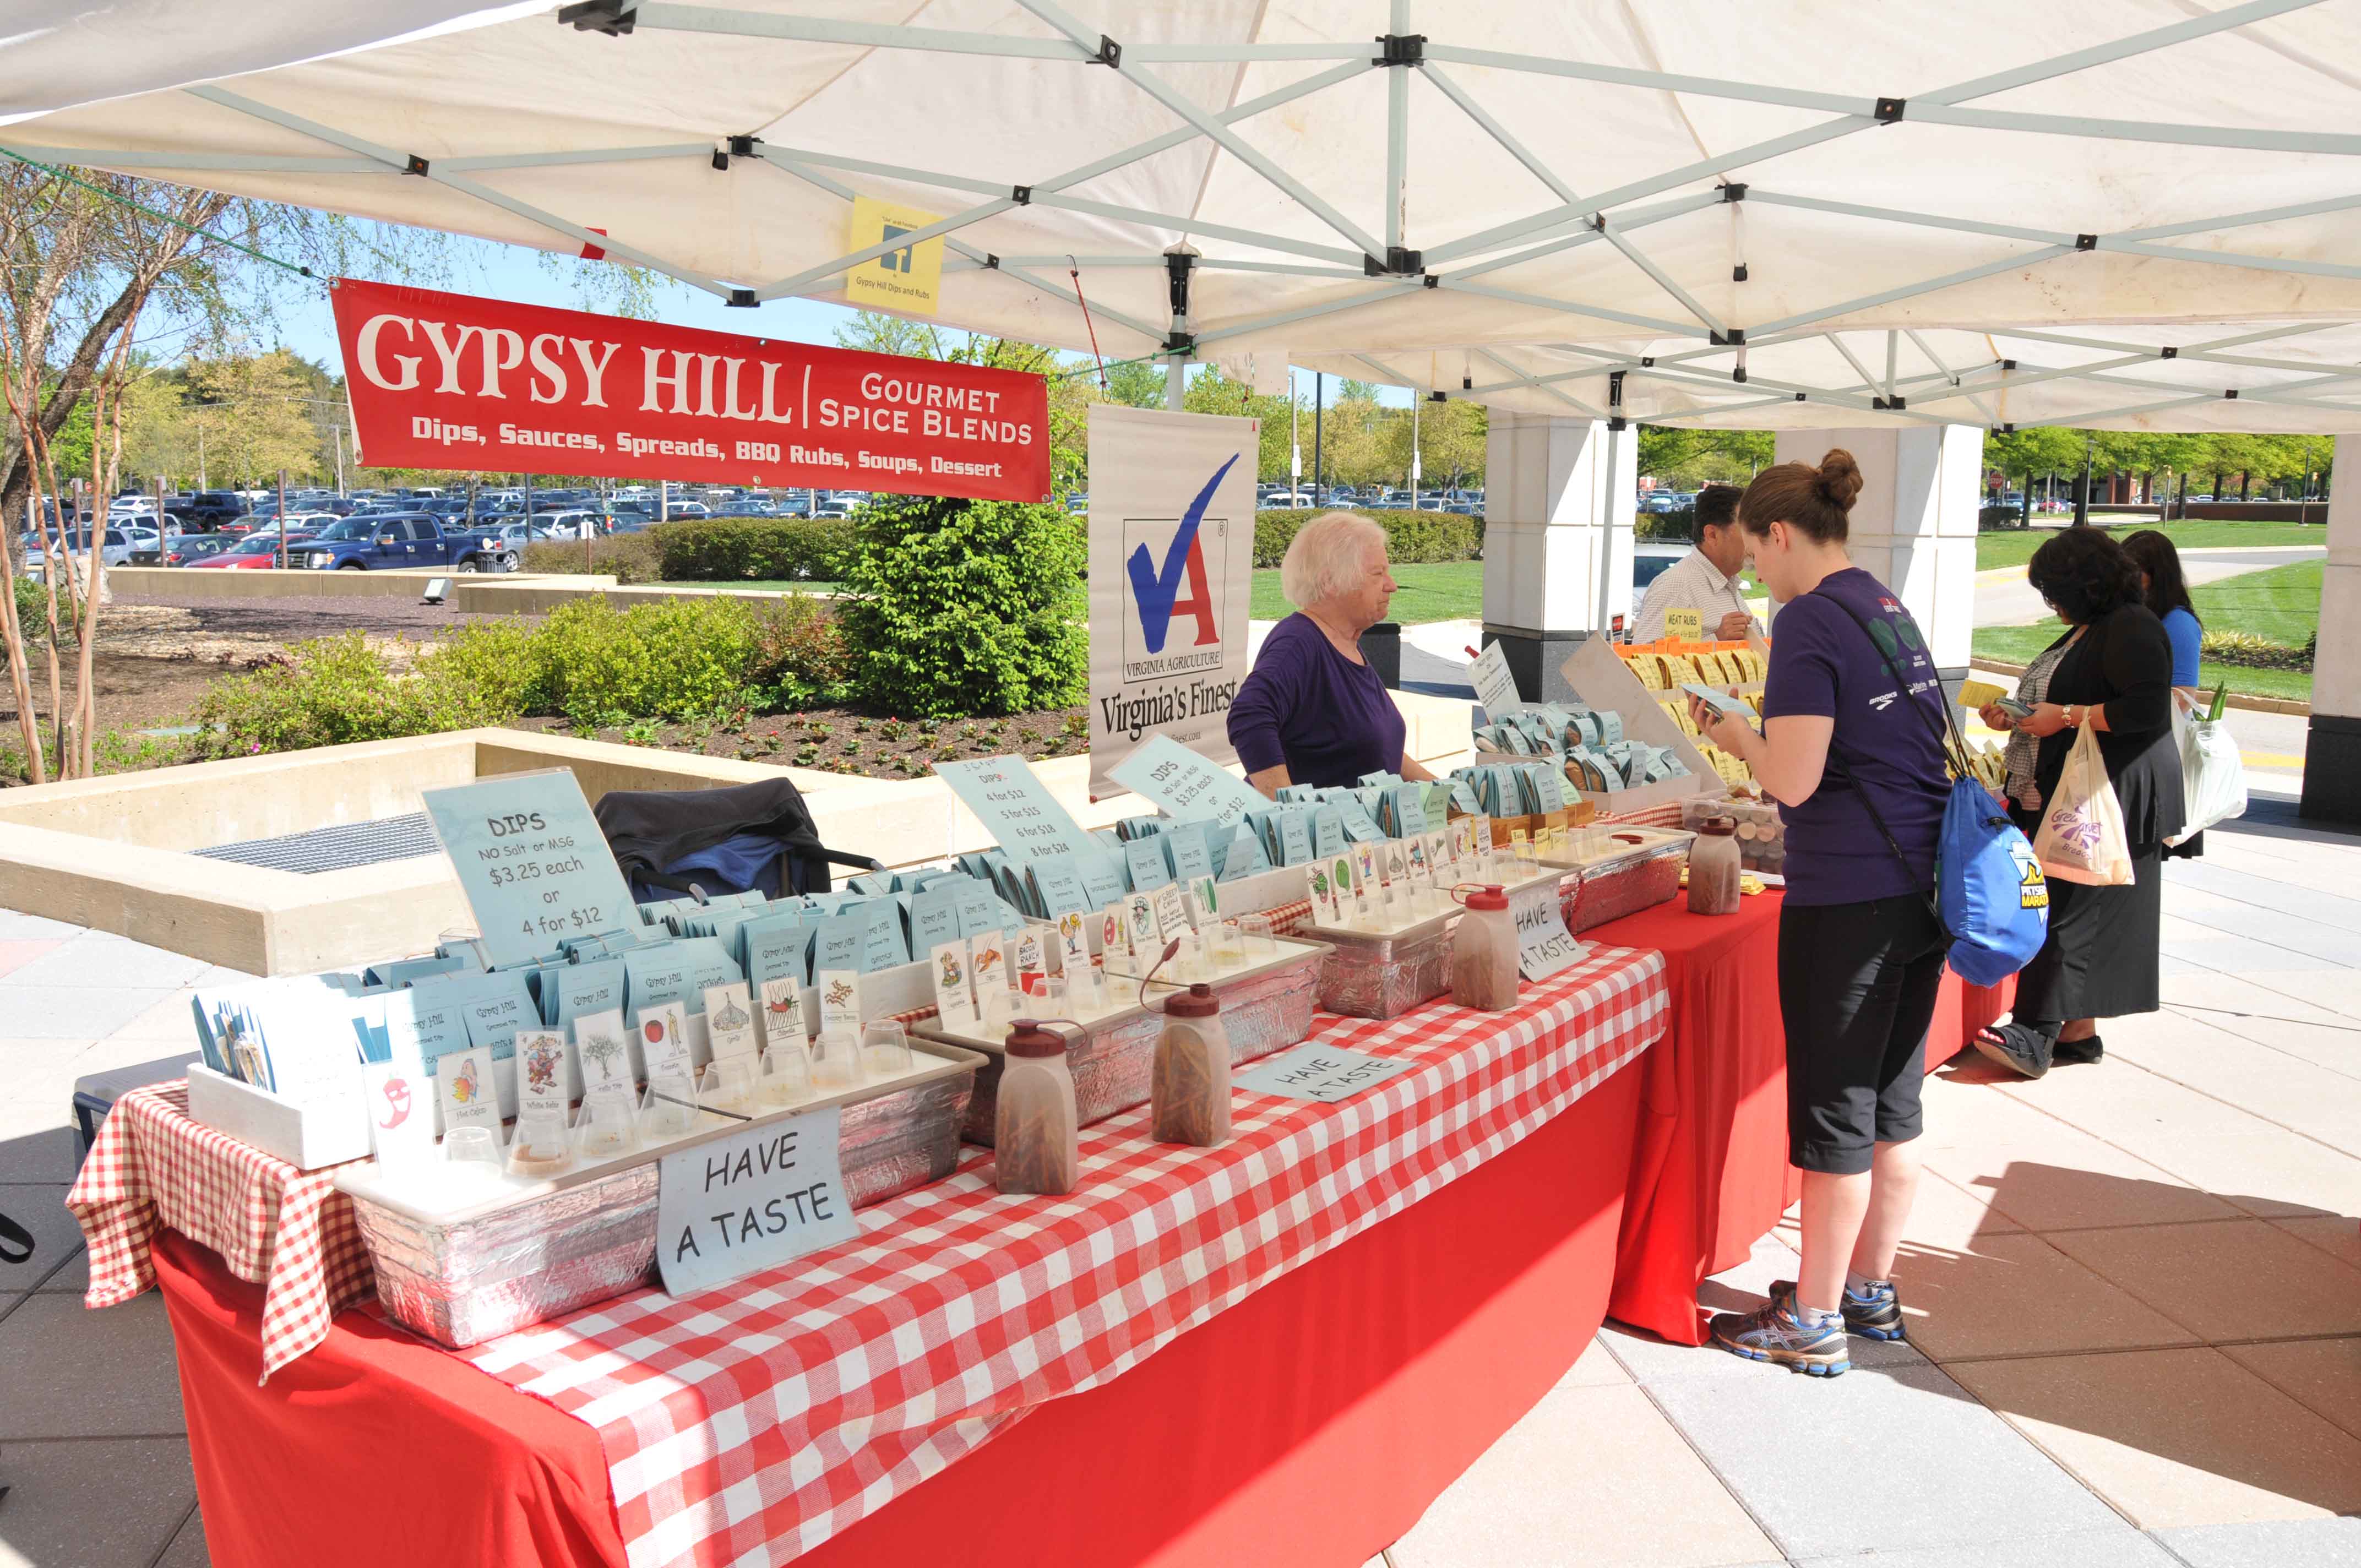 Beneath a white canopy tent is a red checkered table lined with different types of dips and rubs.  There is a red sign above the table, labeled “Gypsy Hill